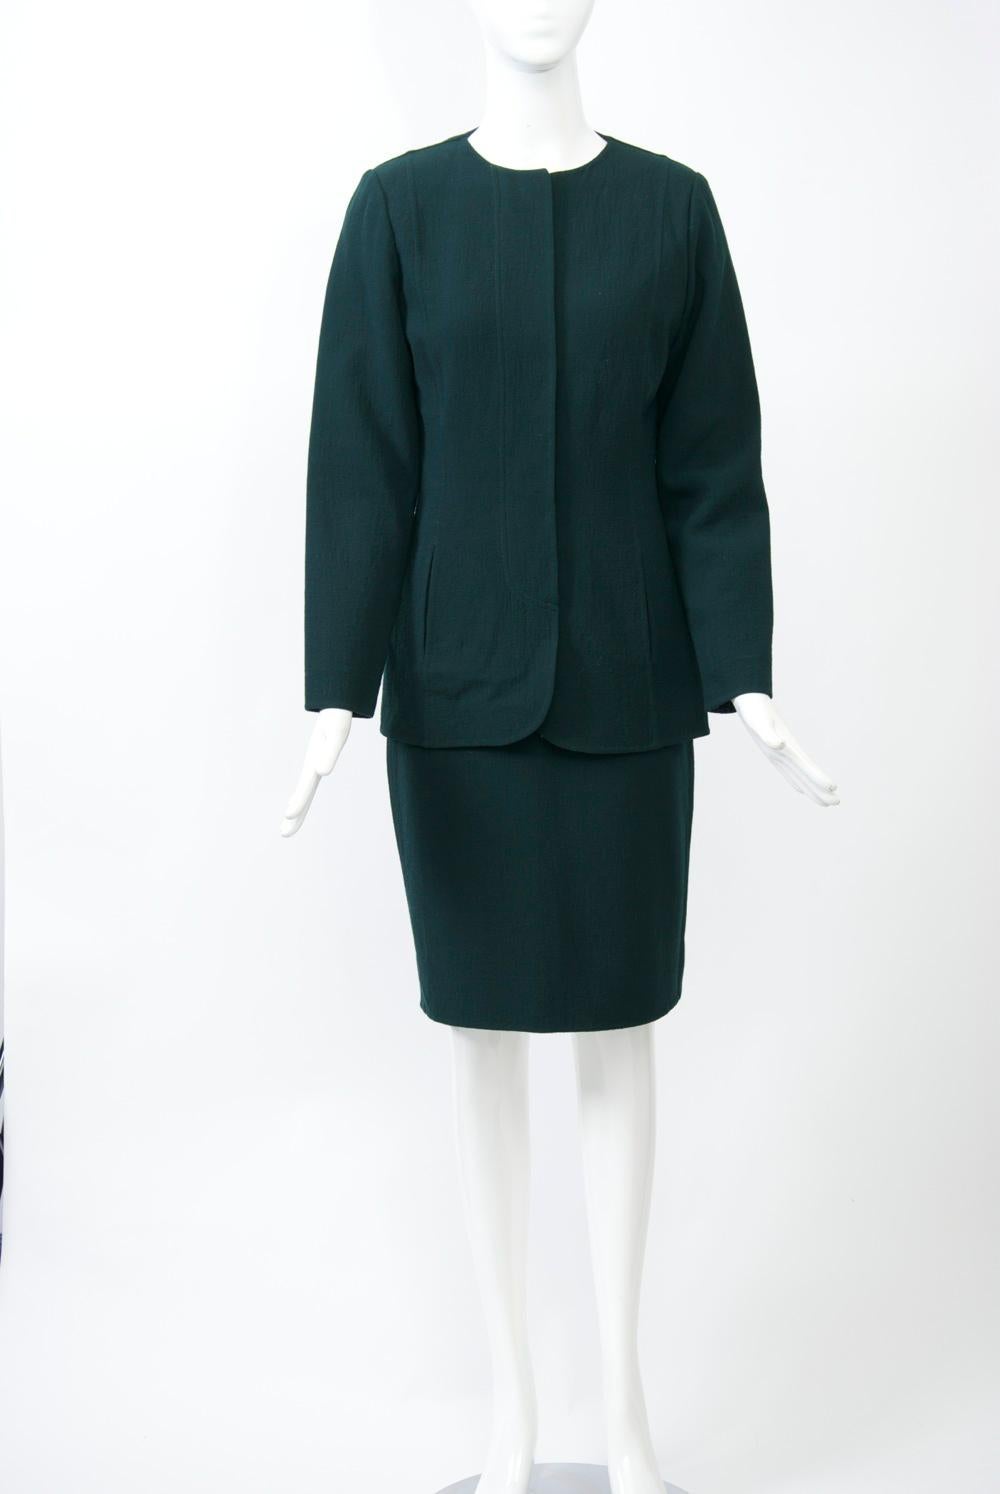 Geoffrey Beene forest green suit, c.1980s, with the seemingly simple, but exquisitely detailed, shaping for which the designer was known. The suit is composed of a wool crepe and features a single-breasted, round-neck jacket with welted seaming and